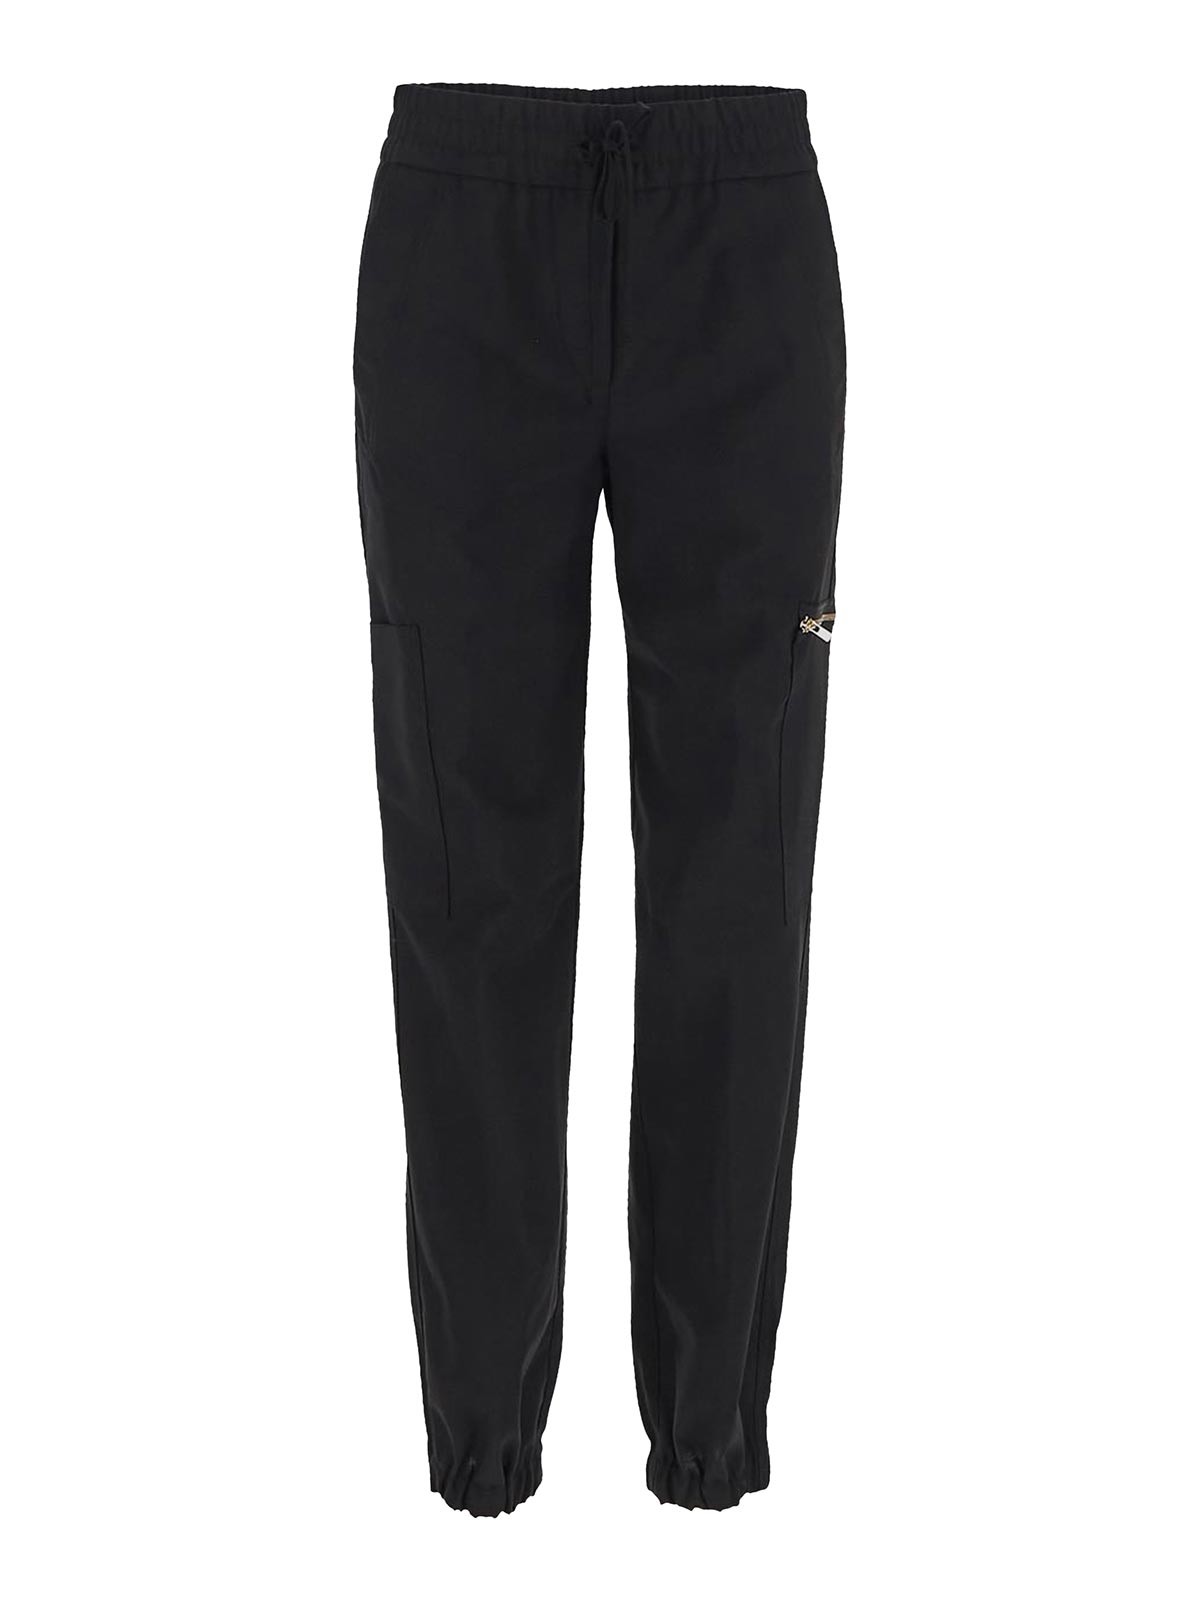 Semicouture Black Trousers With Side Pockets